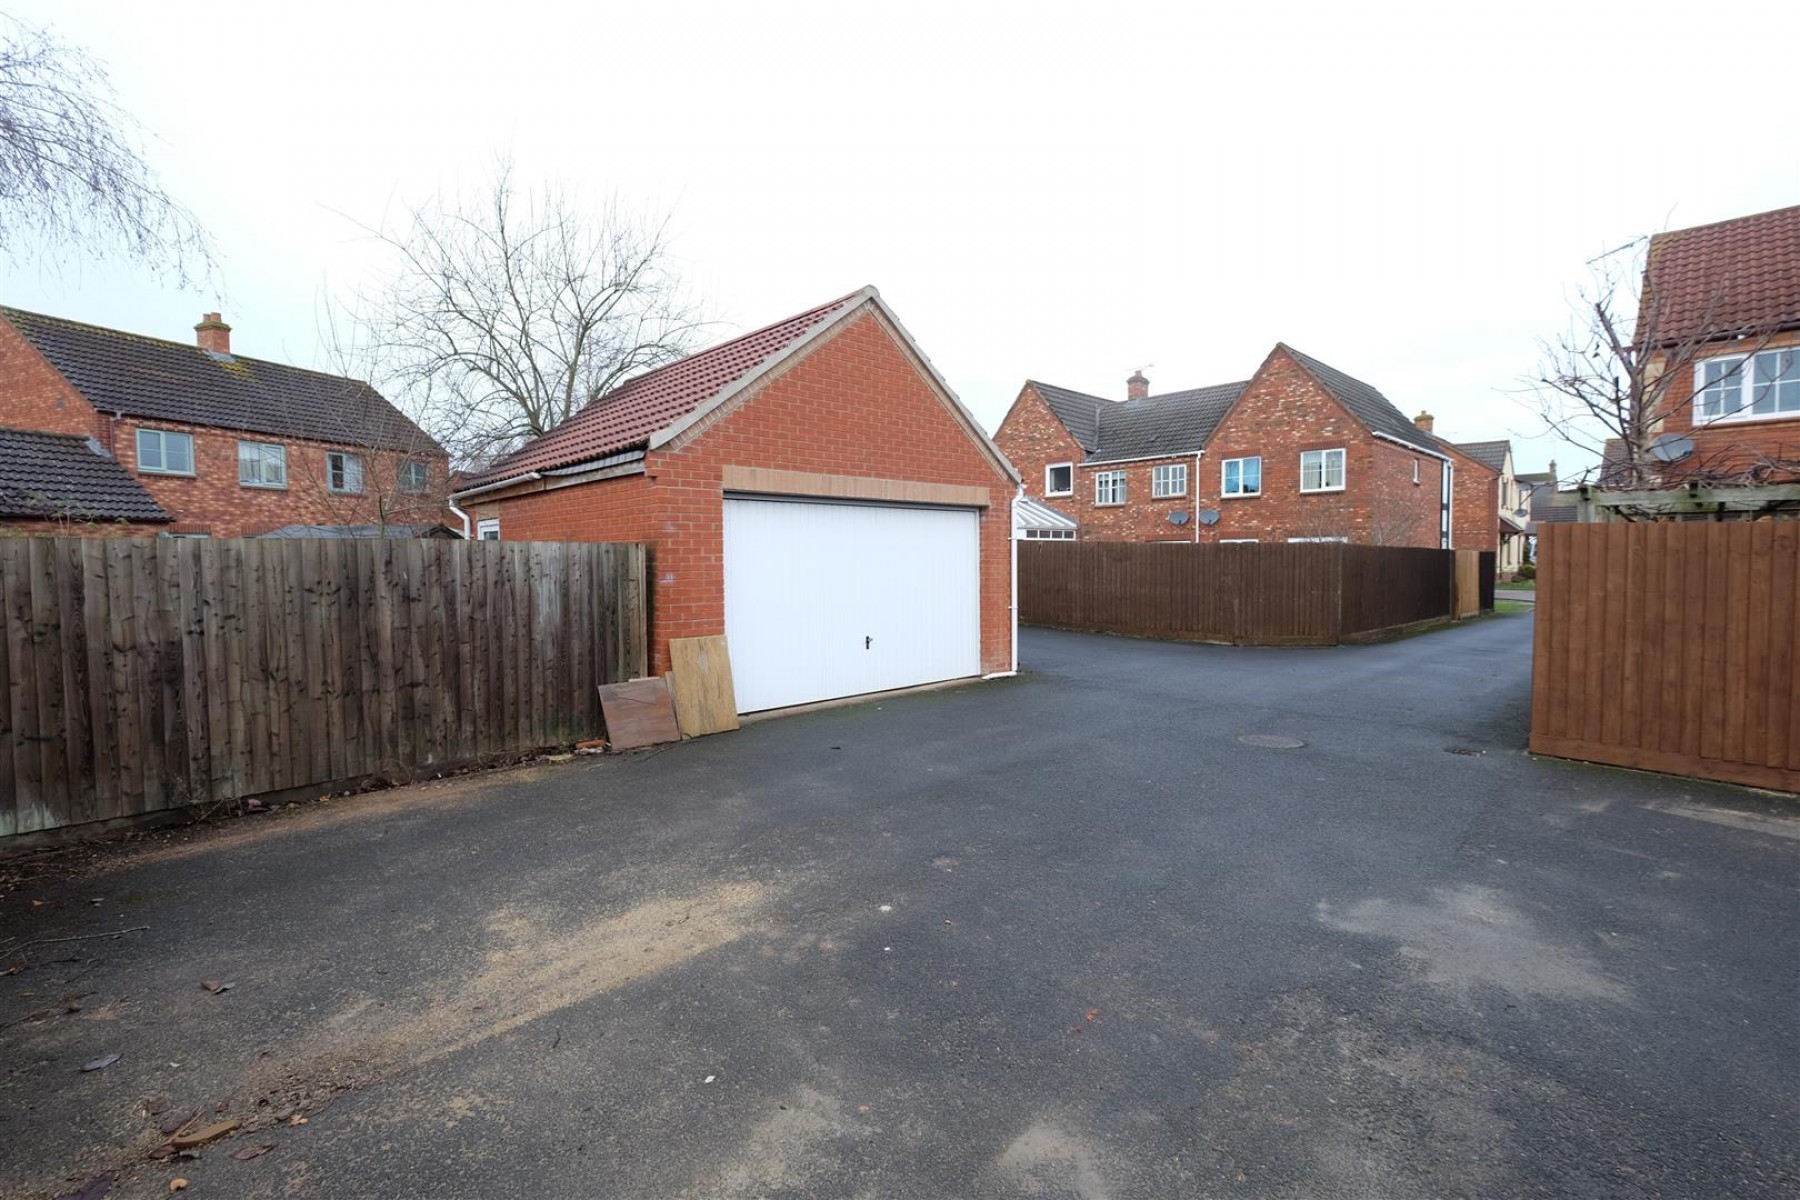 Images for DETACHED DOUBLE GARAGE - TEWKESBURY